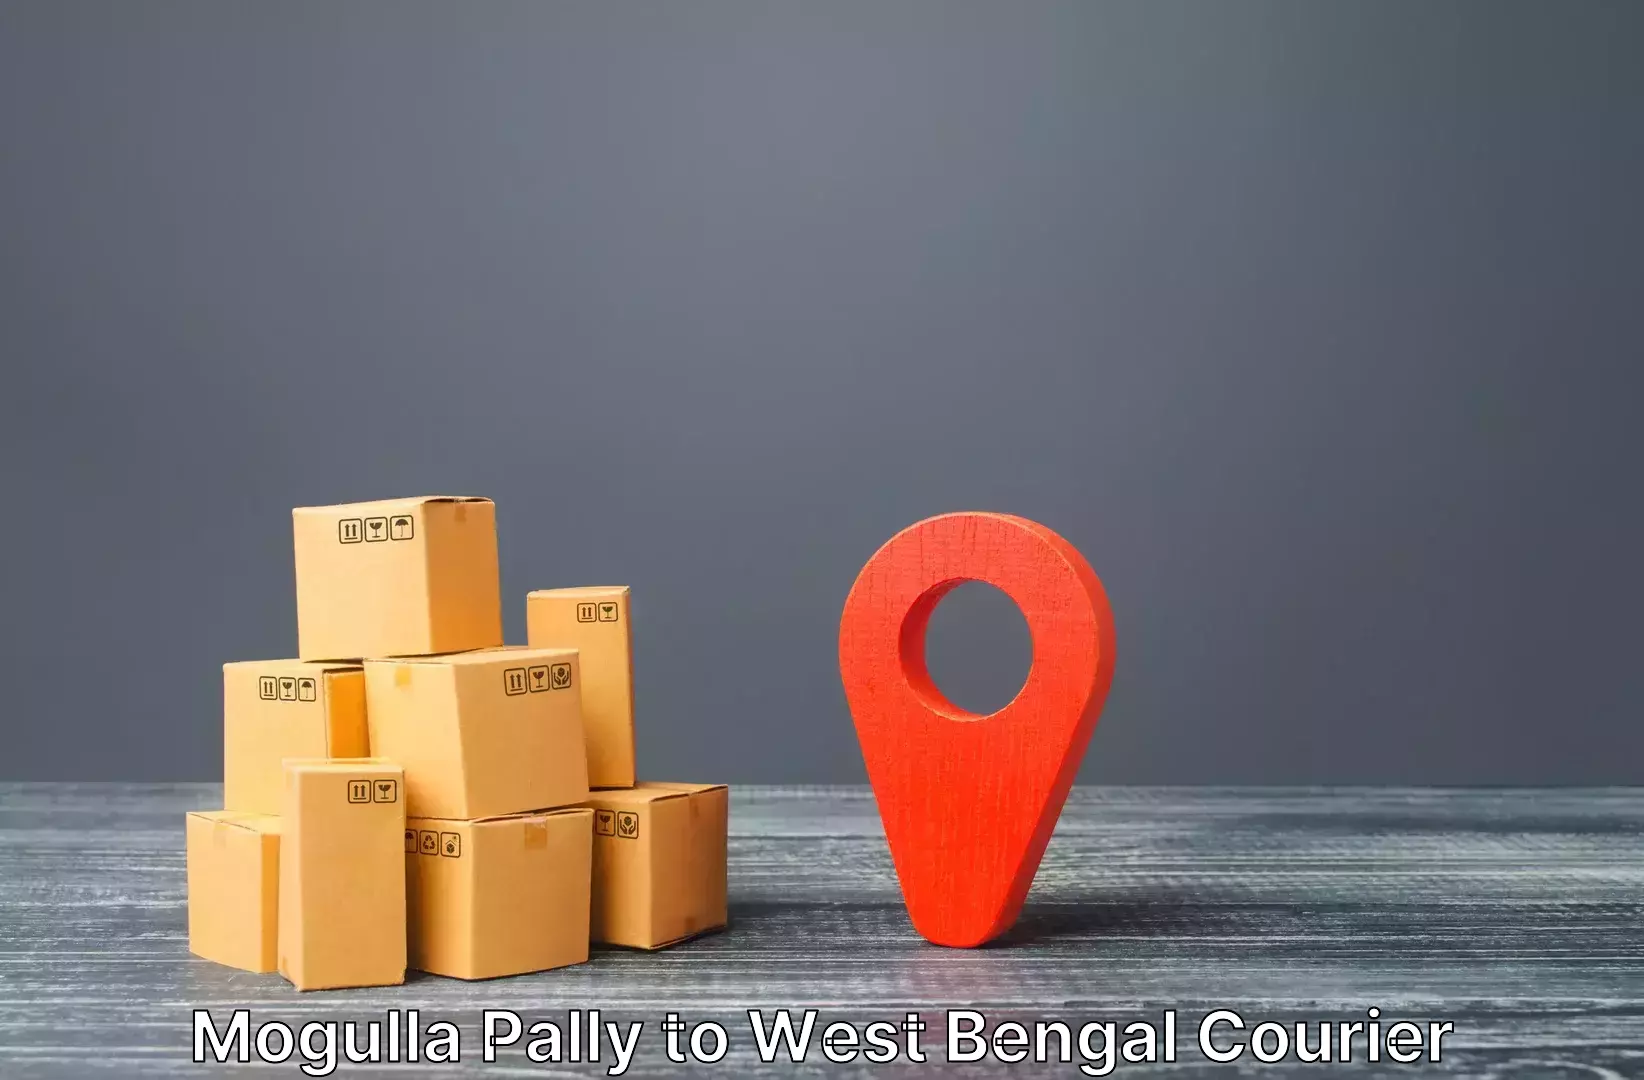 Instant baggage transport quote Mogulla Pally to Surjapur